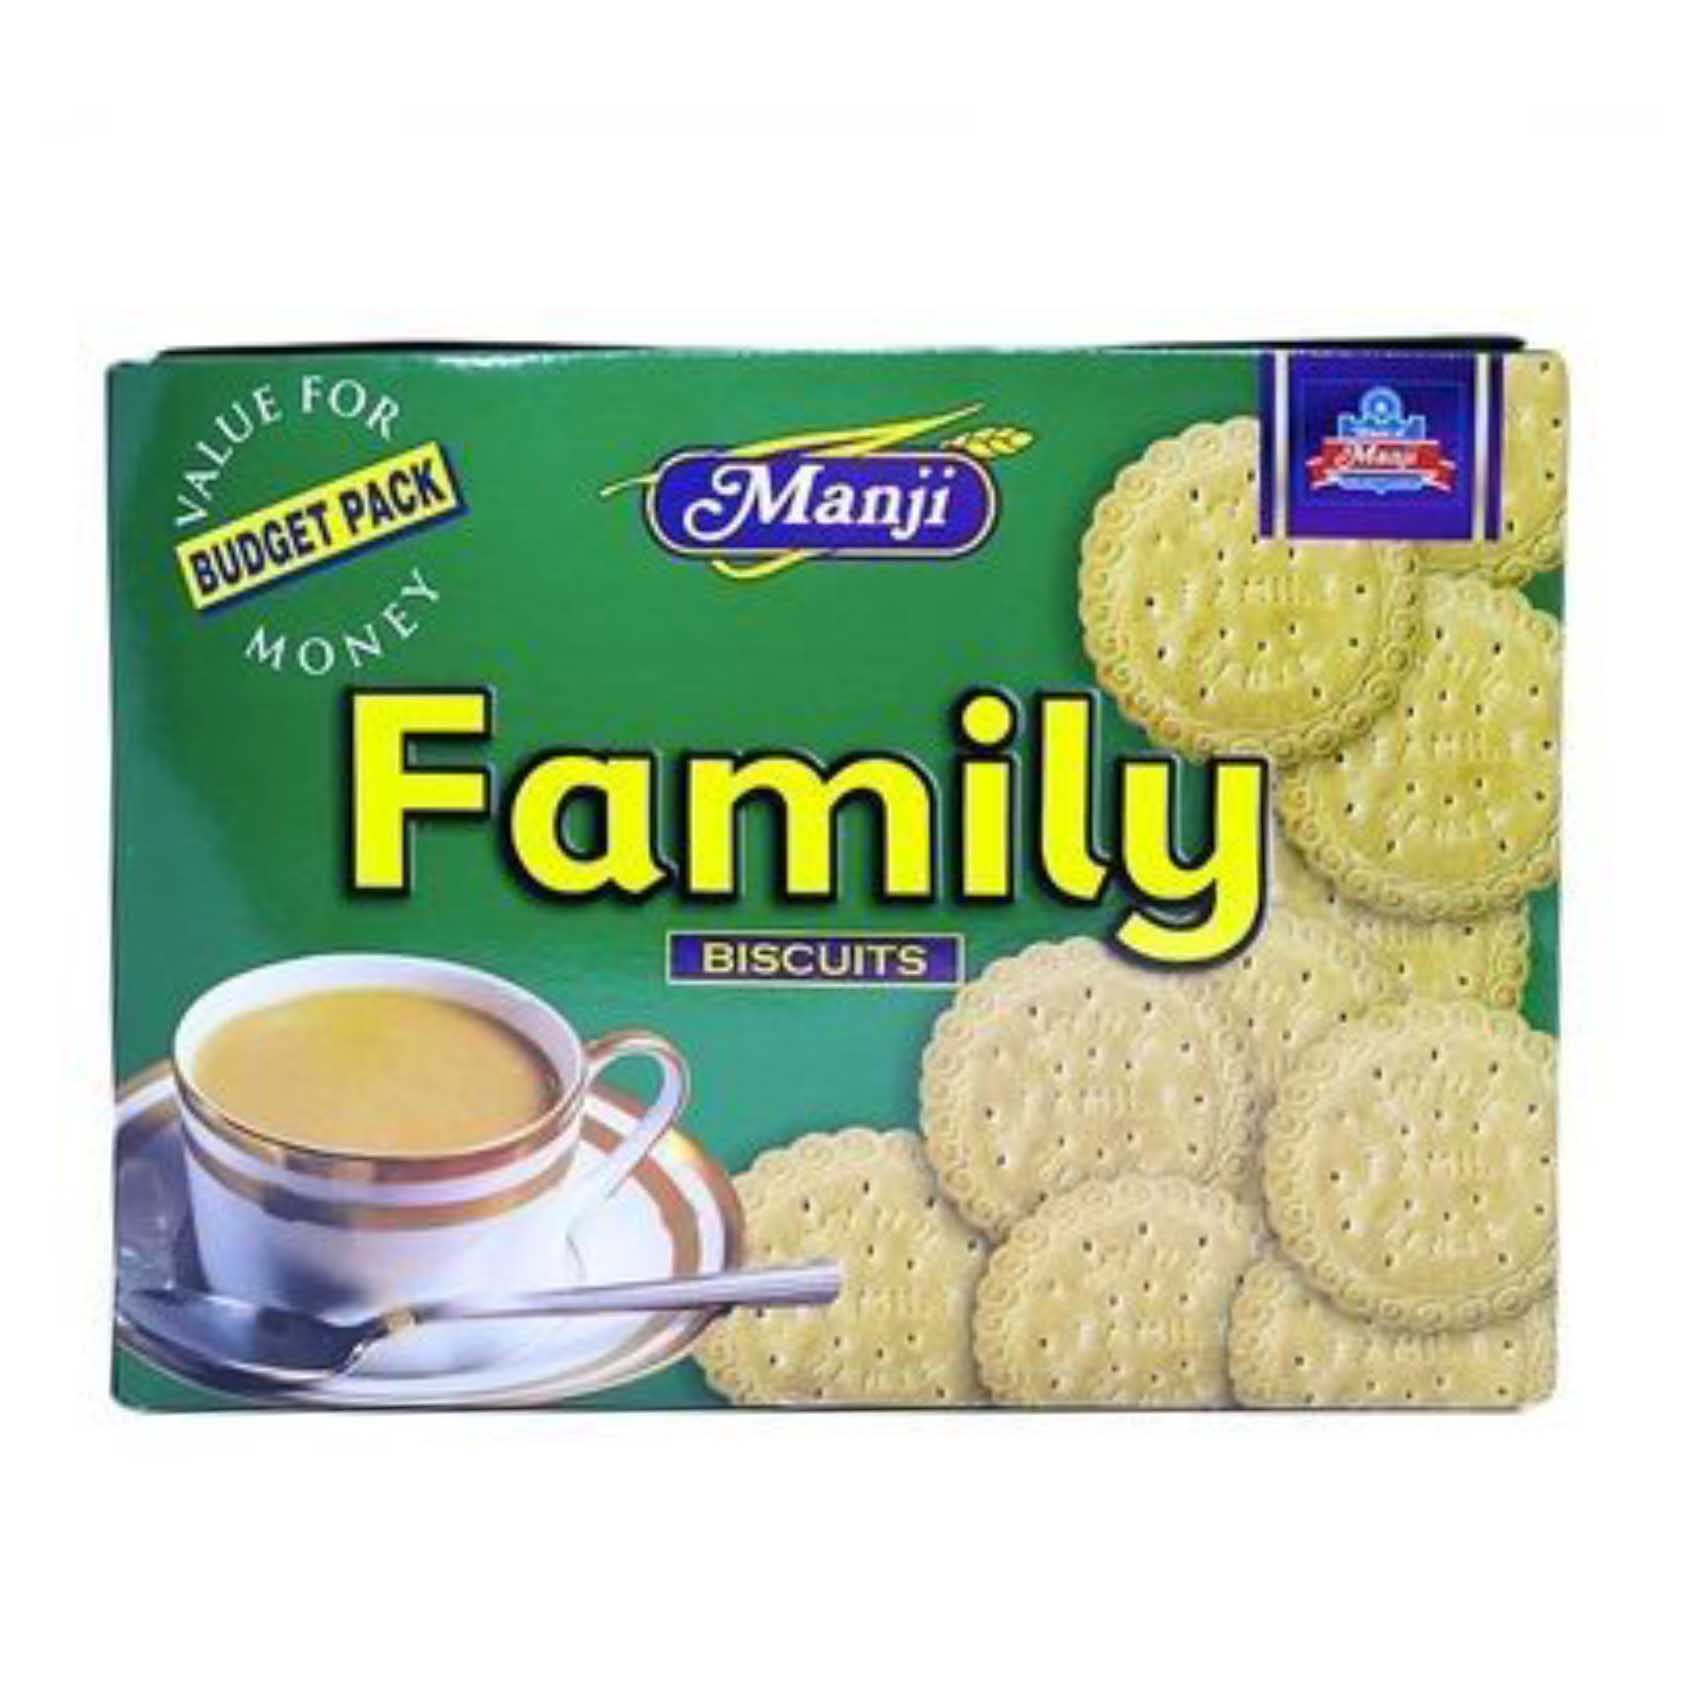 Manji Family Biscuits Budget Pack 1kg